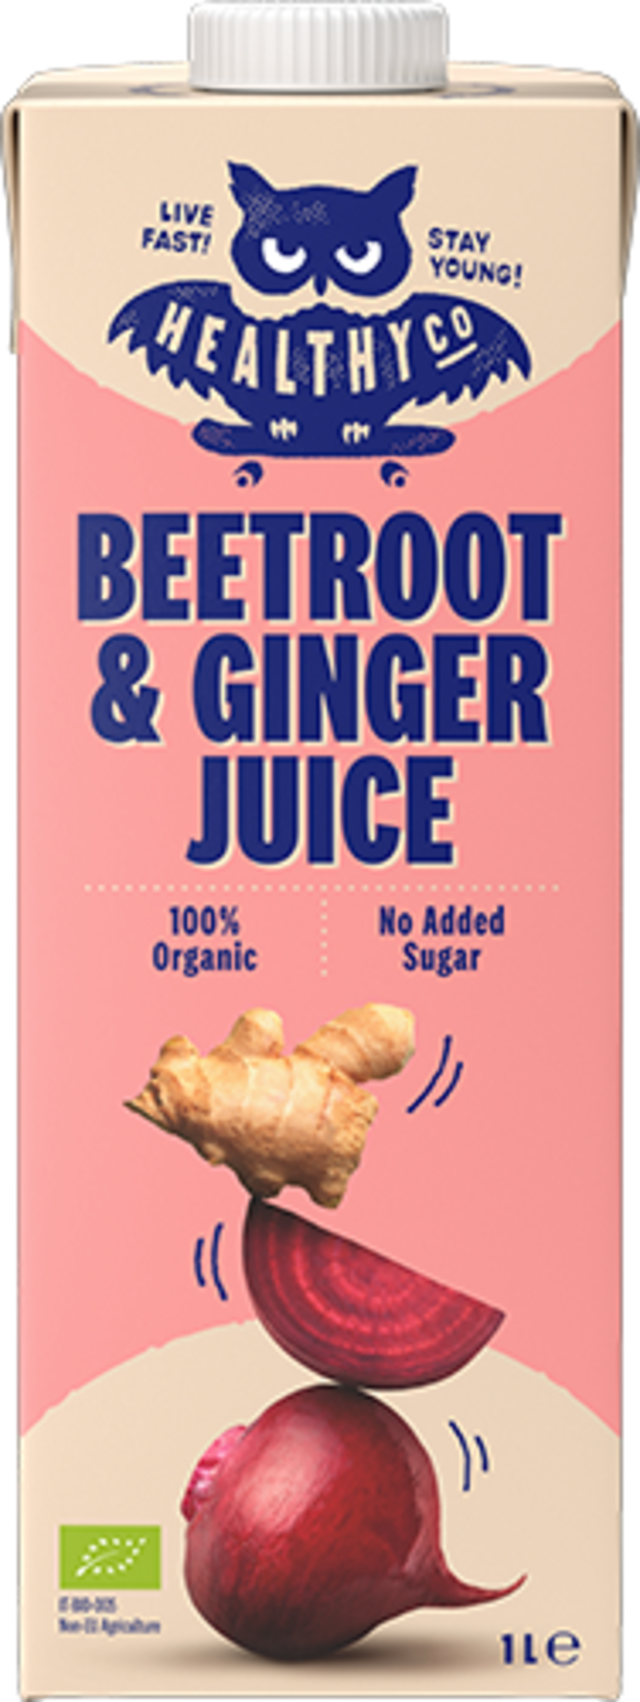 7021_ECO_GINGER_BEETROOT_JUICE_1L_x_8_PCS_Cpack_Validoo.png